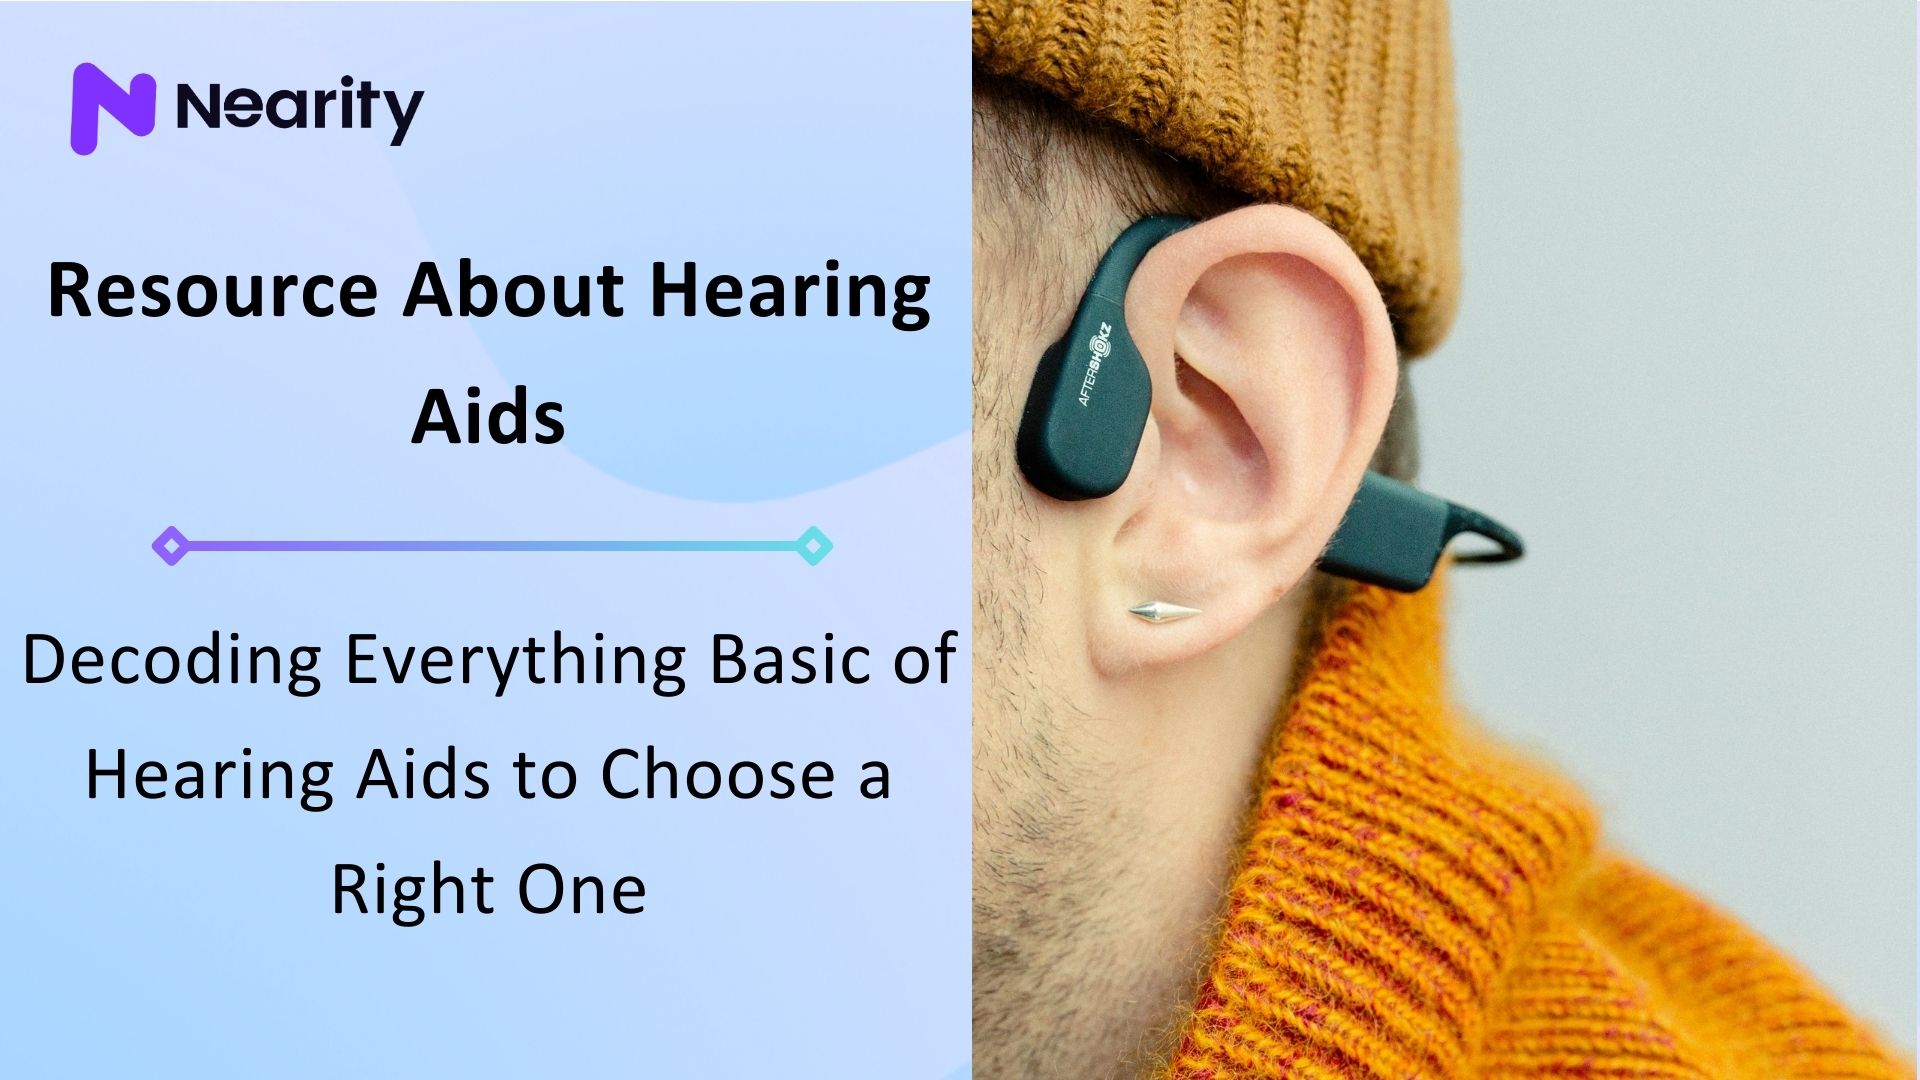 Decoding Everything Basic of Hearing Aids to Choose a Right One